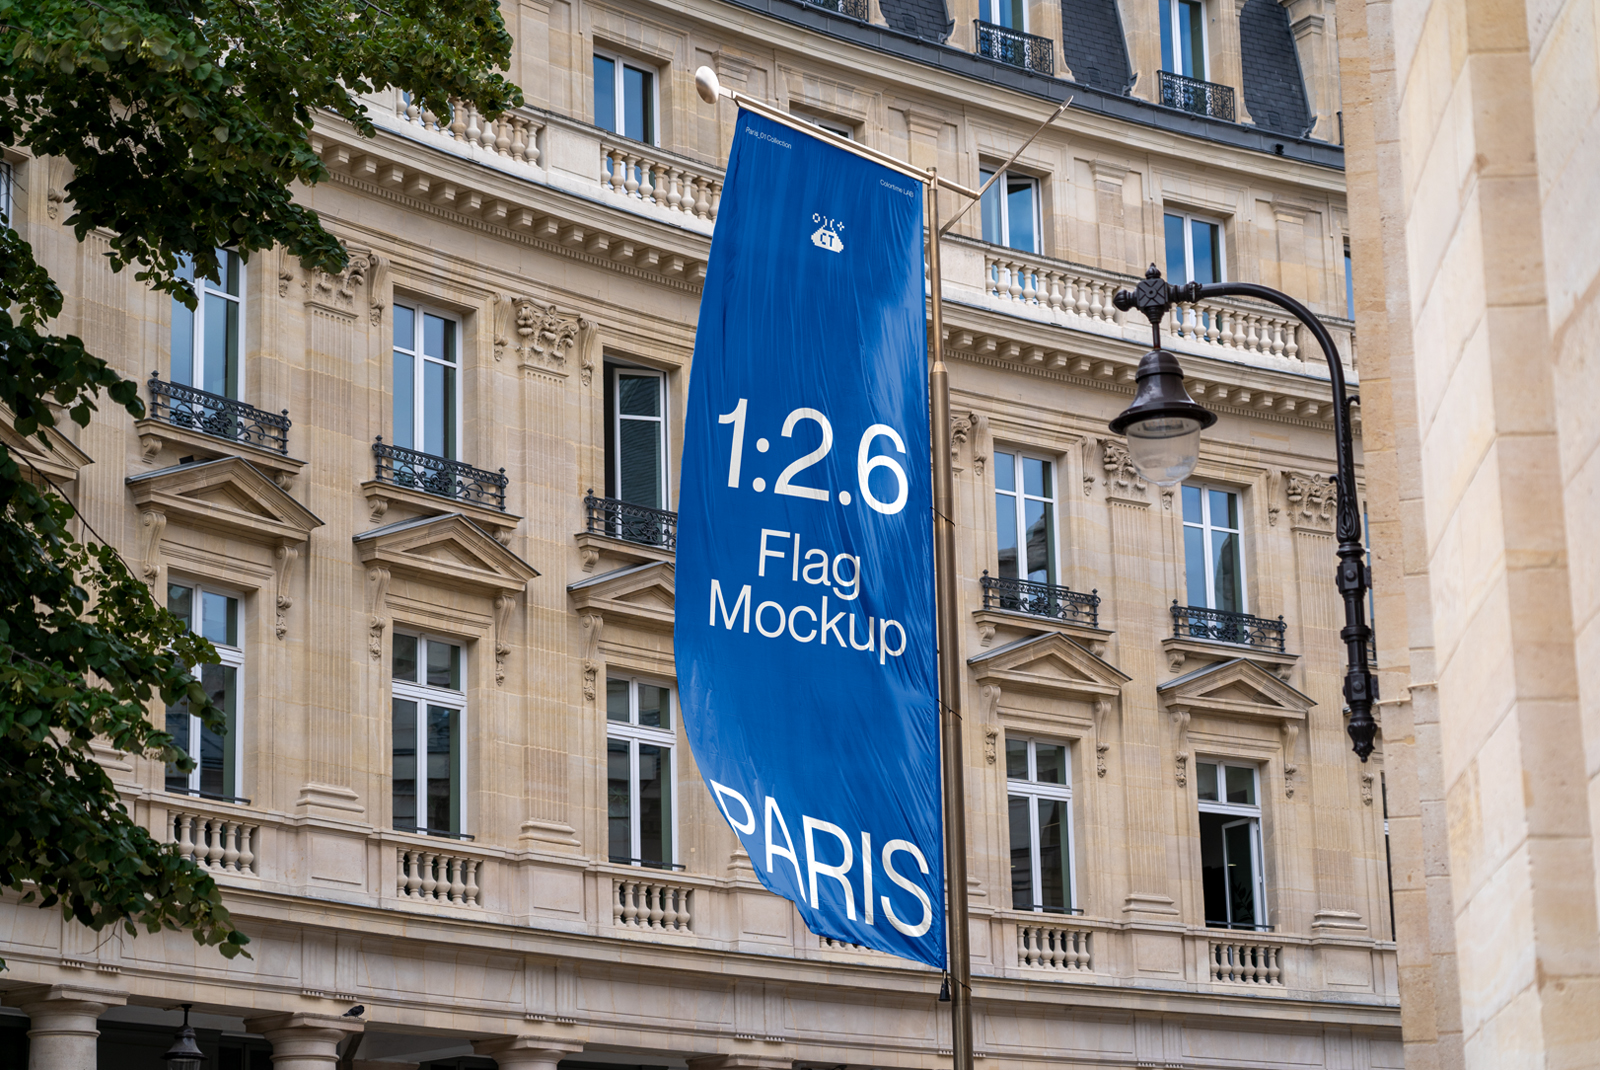 Urban flag mockup hanging on a classic building facade, with street light, ideal for branding presentations and city mockup designs.